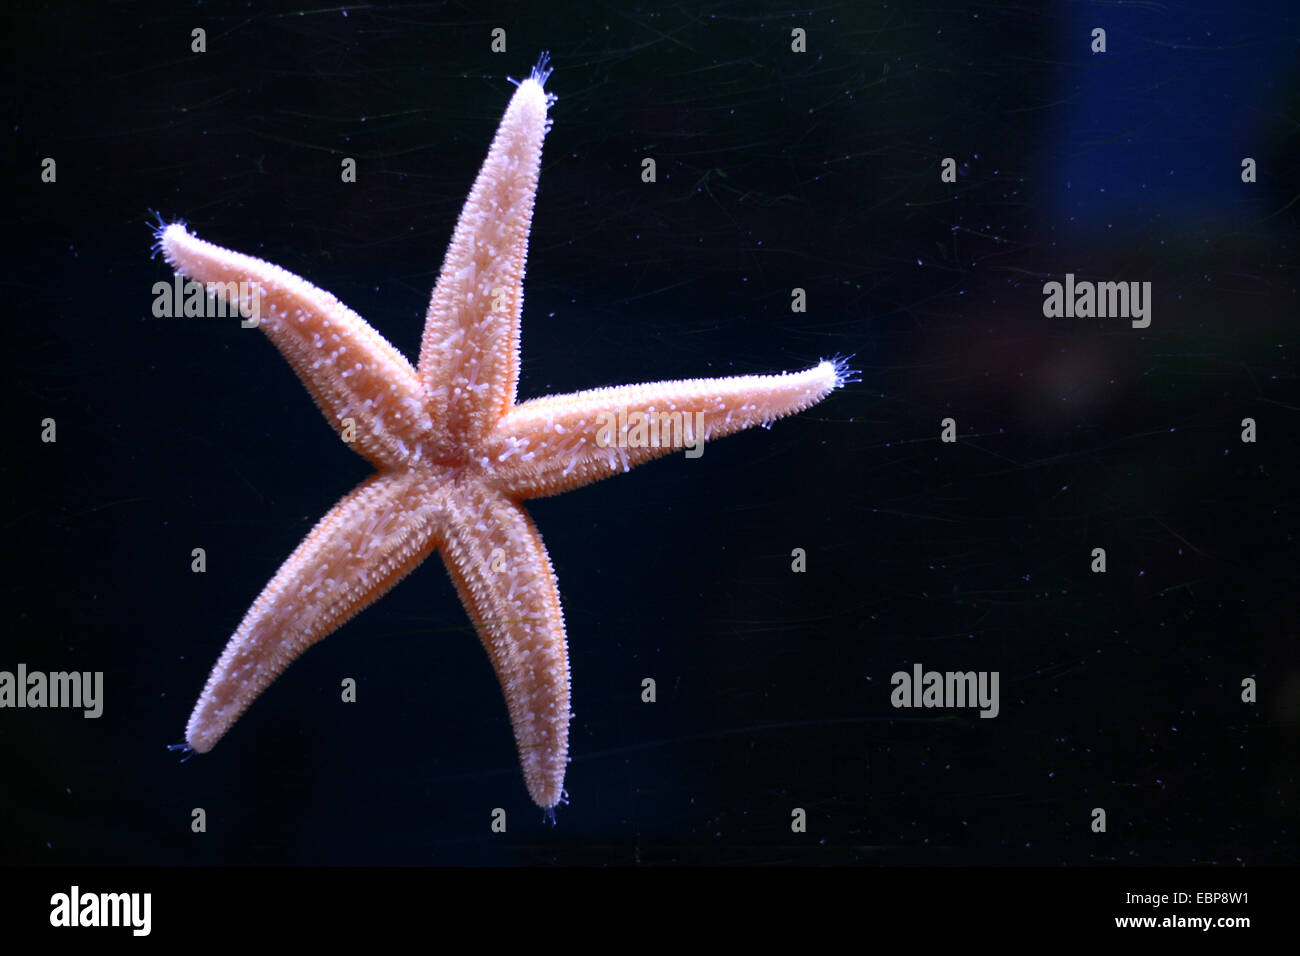 Northern Pacific sea star (Asterias amurensis) at Moscow Zoo, Russia. Stock Photo